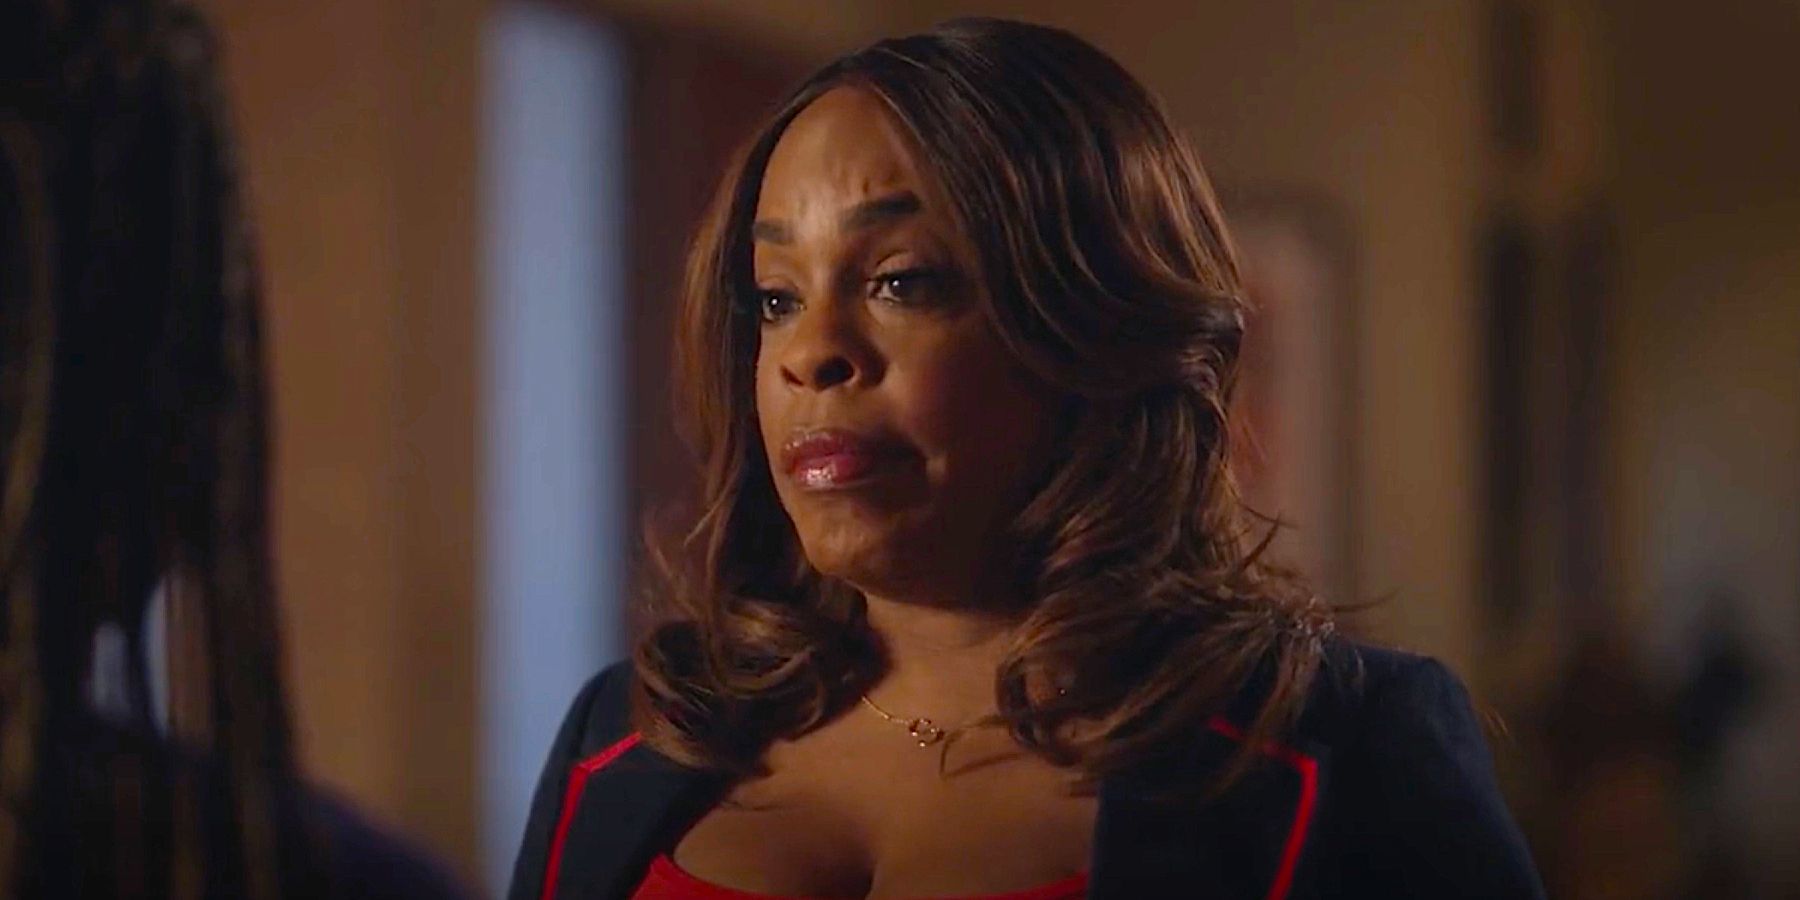 Niecy Nash as Simone Clark in The Rookie Feds season 1 episode 13